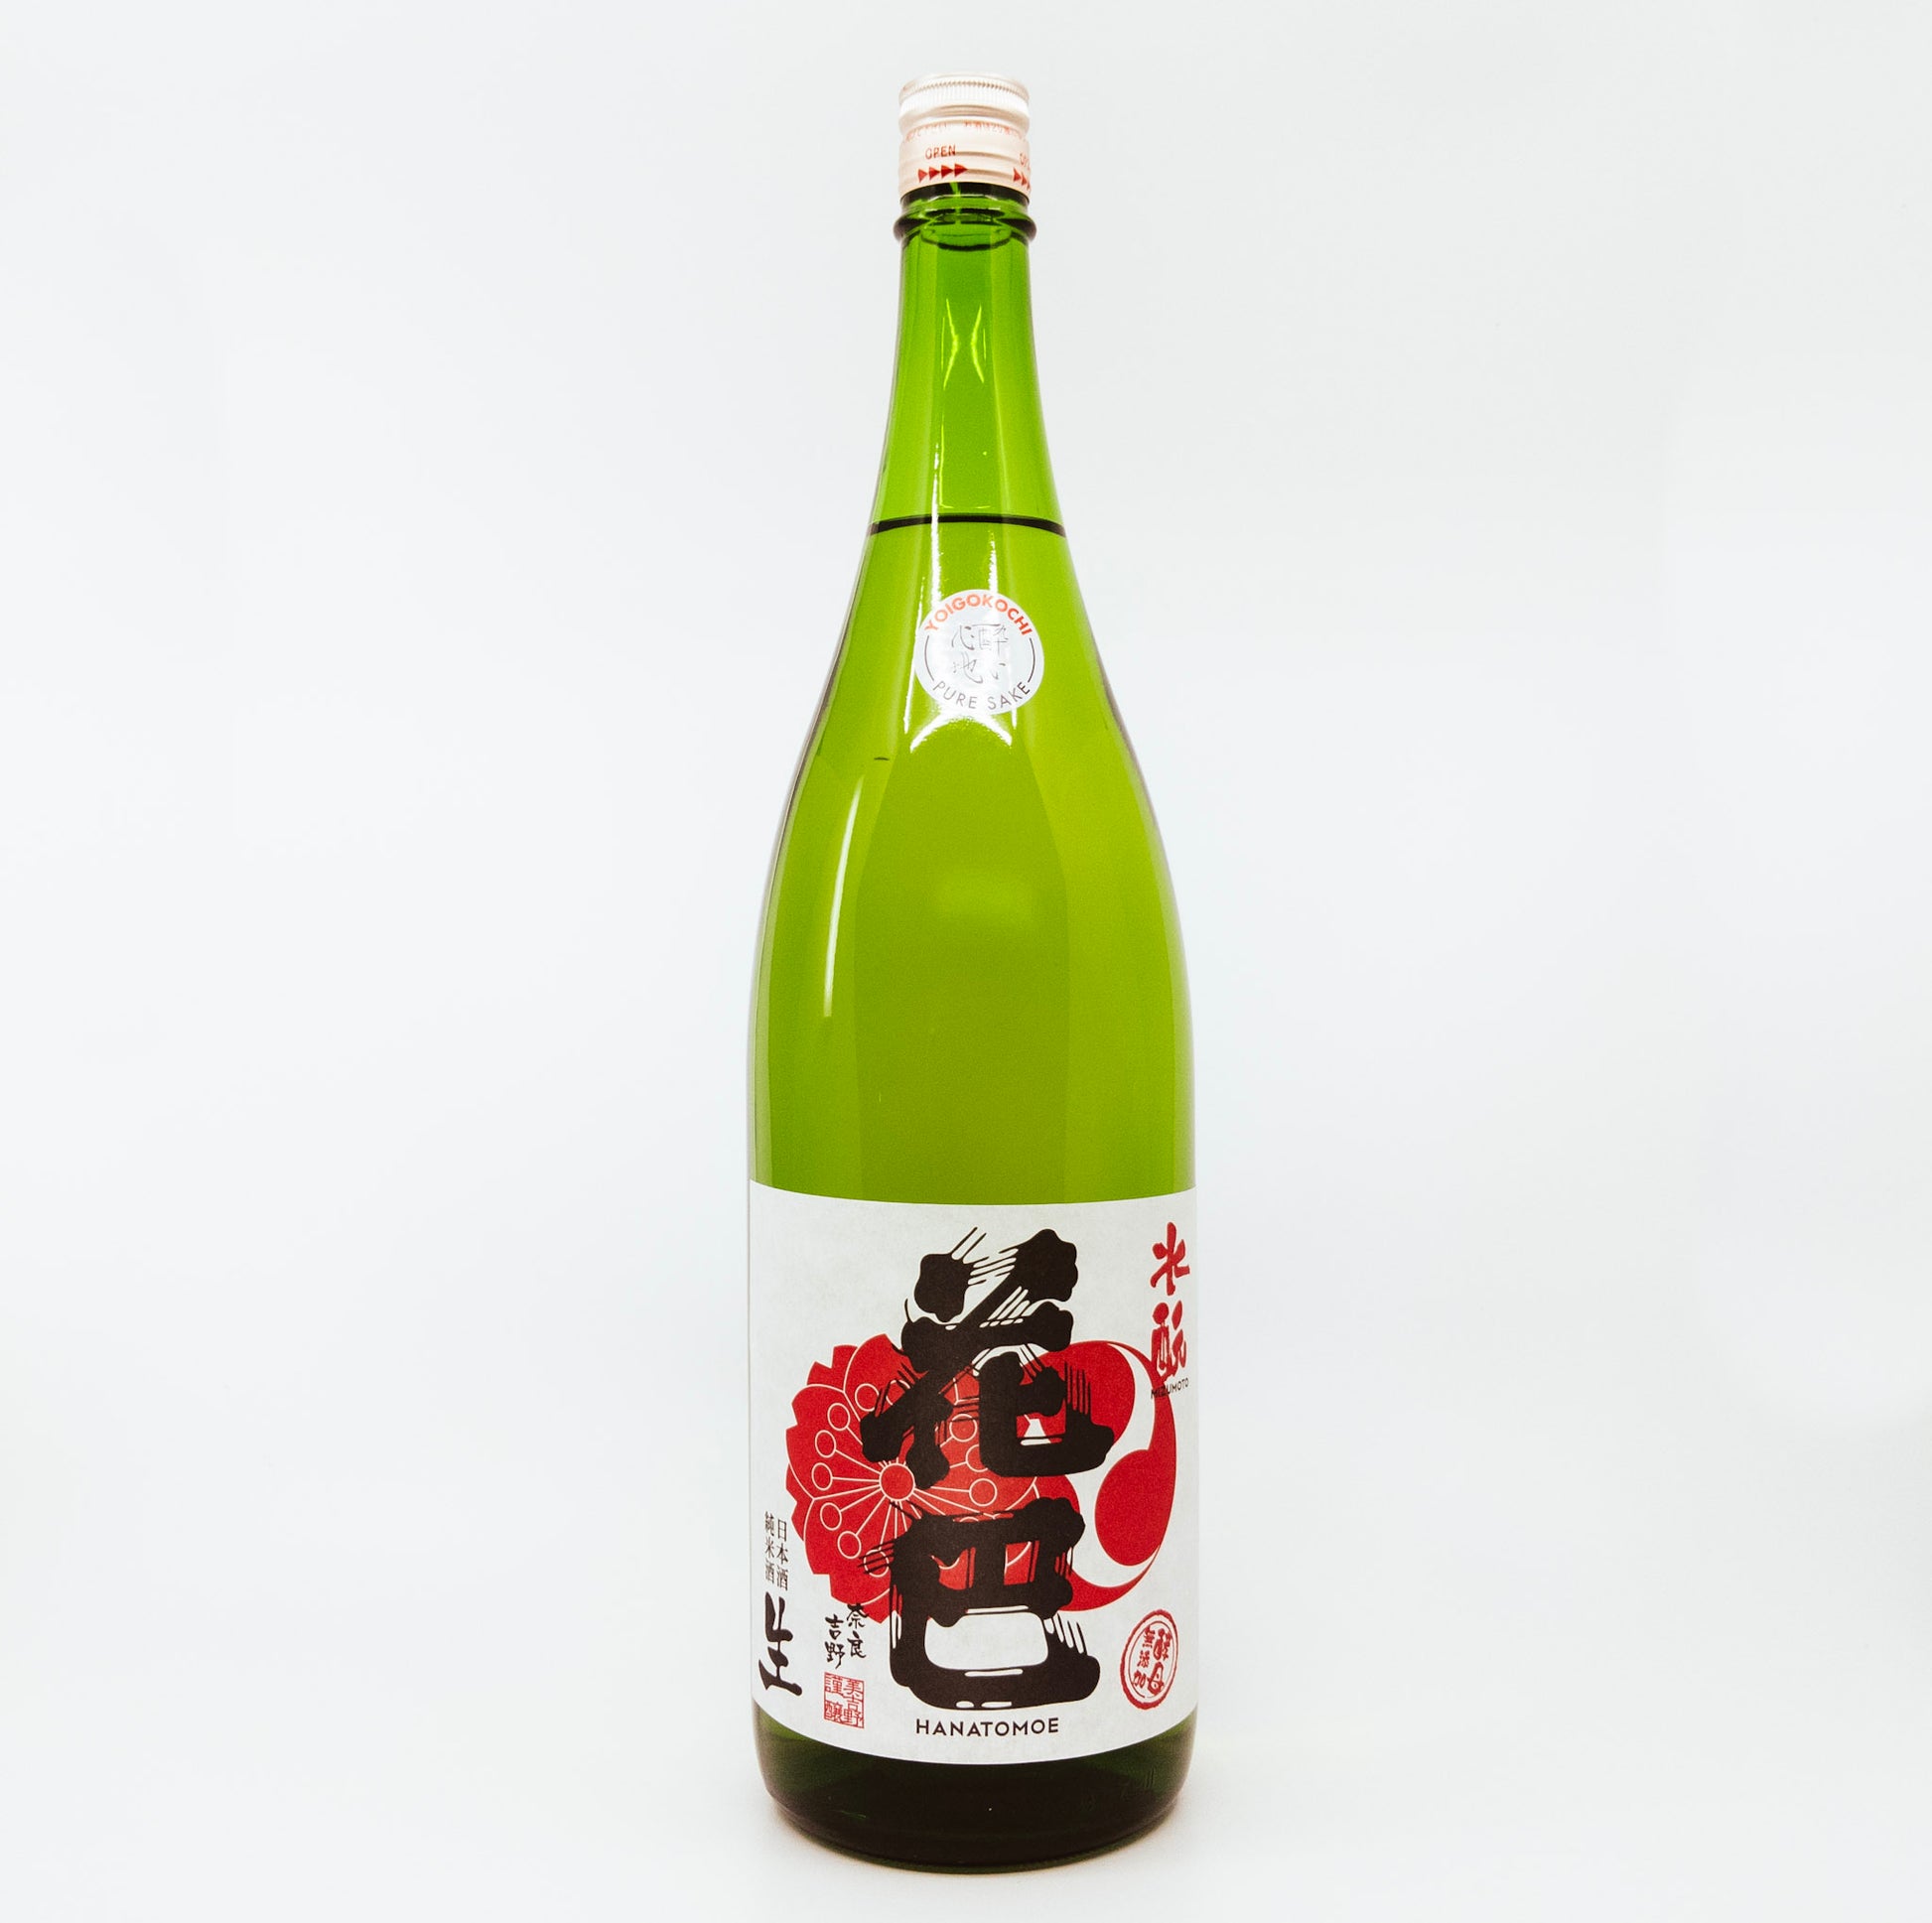 green bottle with red graphic on label